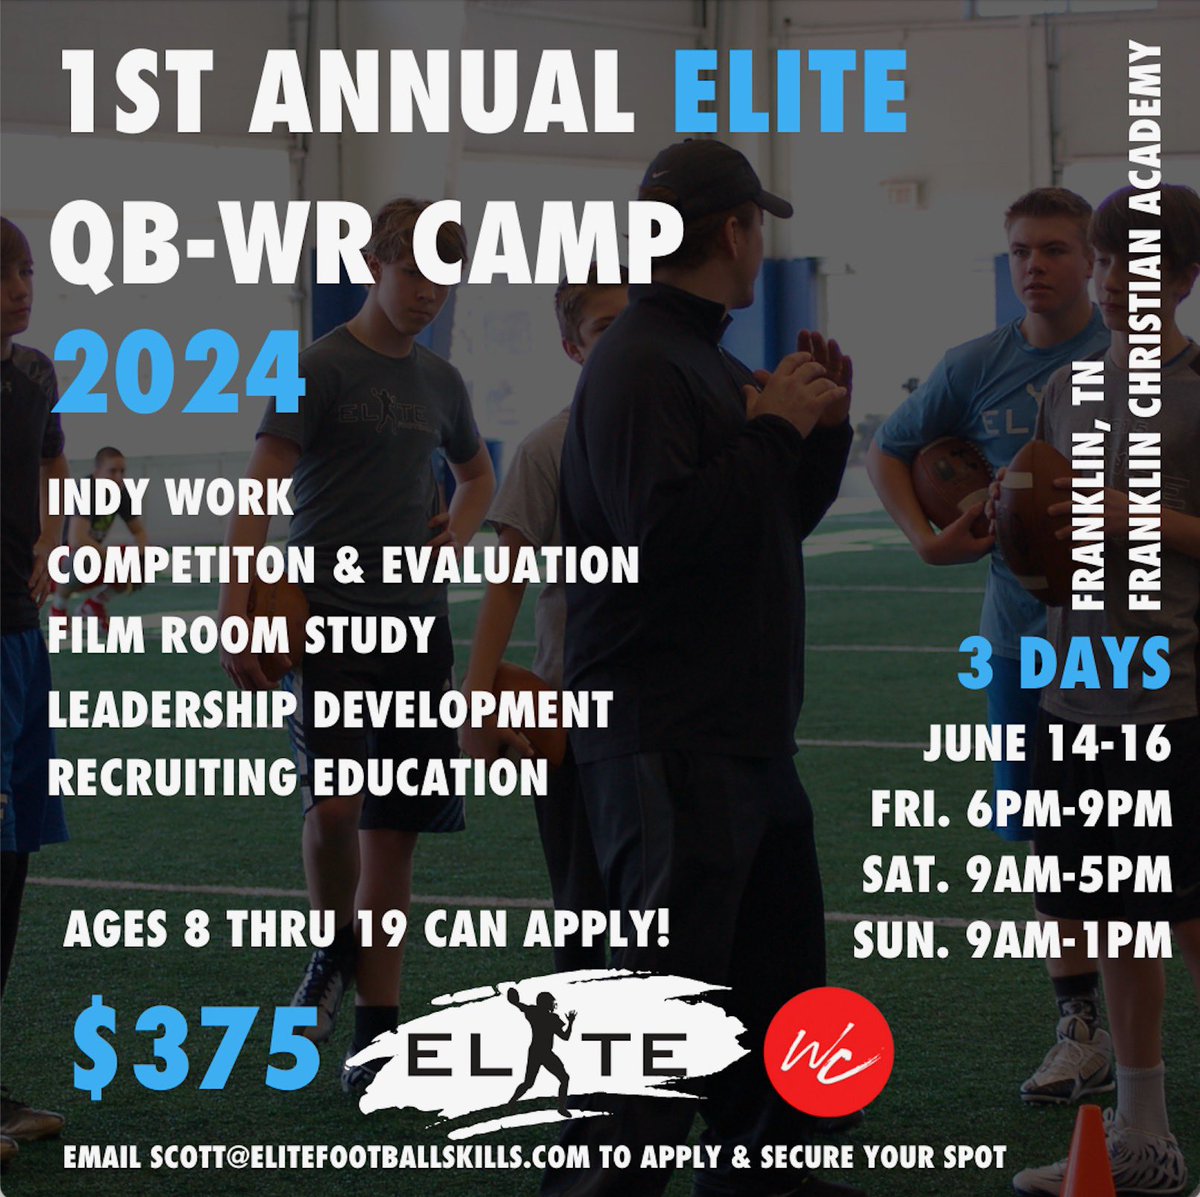 There are just a FEW spots left! Please reach out if you’d like to attend! scott@elitefootballskills.com